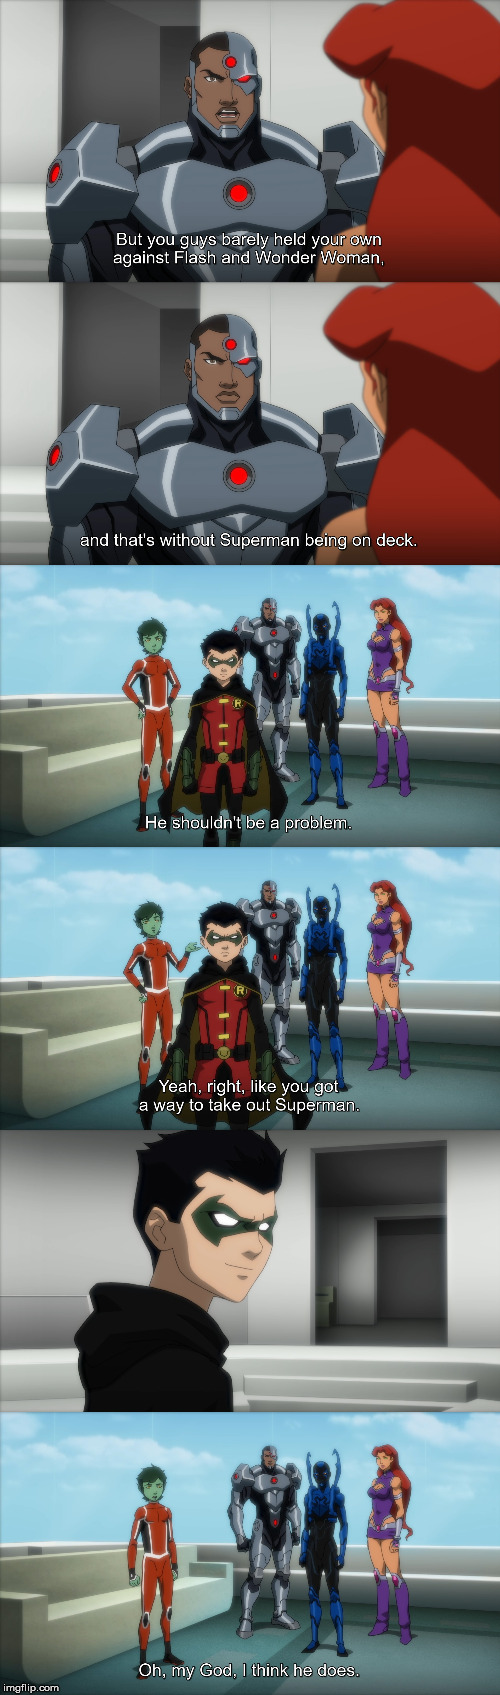 Like Father Like Son | image tagged in batswagger,teentitans | made w/ Imgflip meme maker